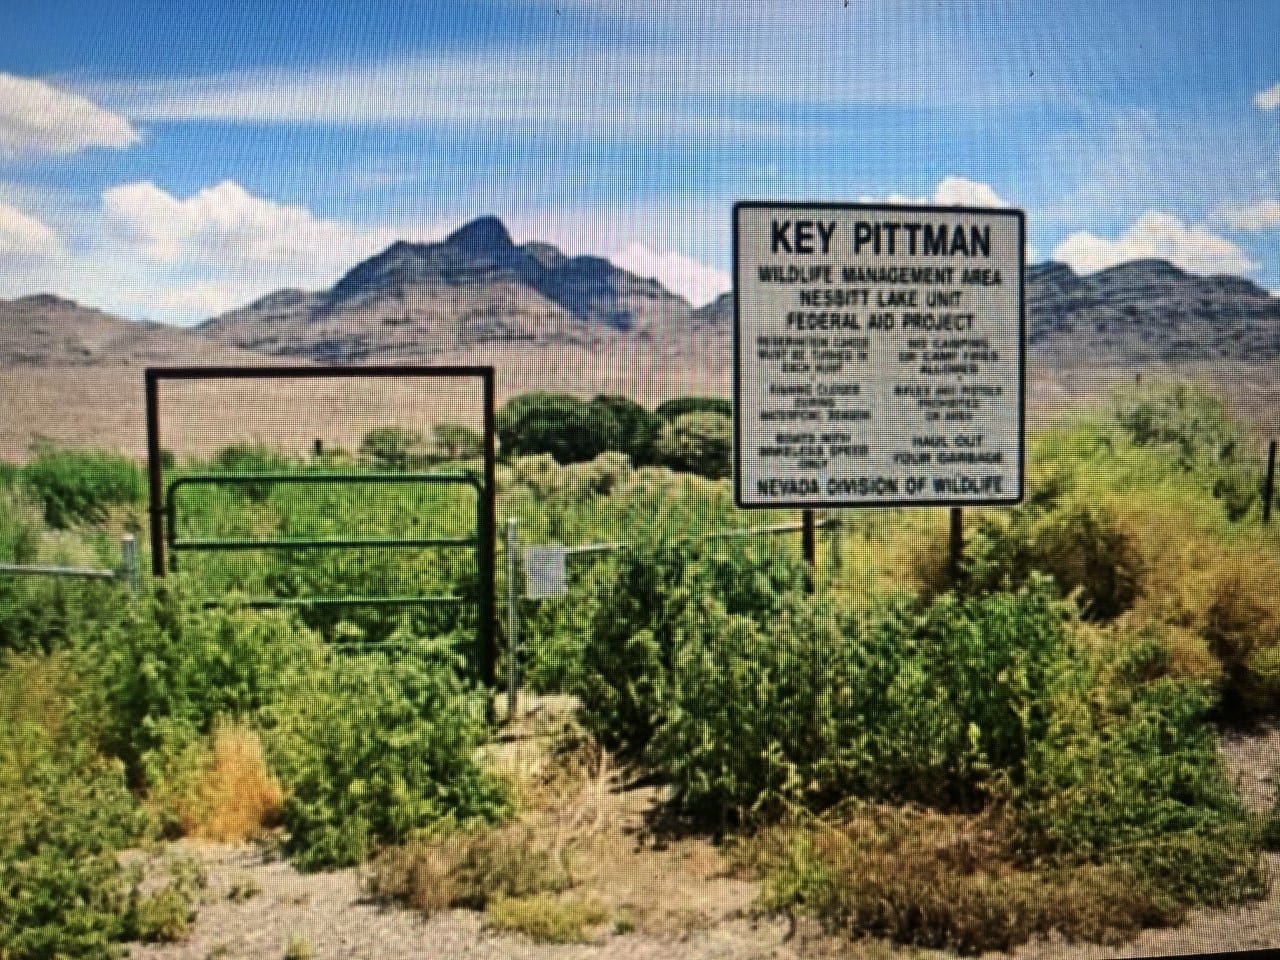 2.61 Acres in Beautiful Crystal Springs Adjacent to Key Pittman Wildlife Area/Lake & Fronts NV State Highway SR-318 photo 1